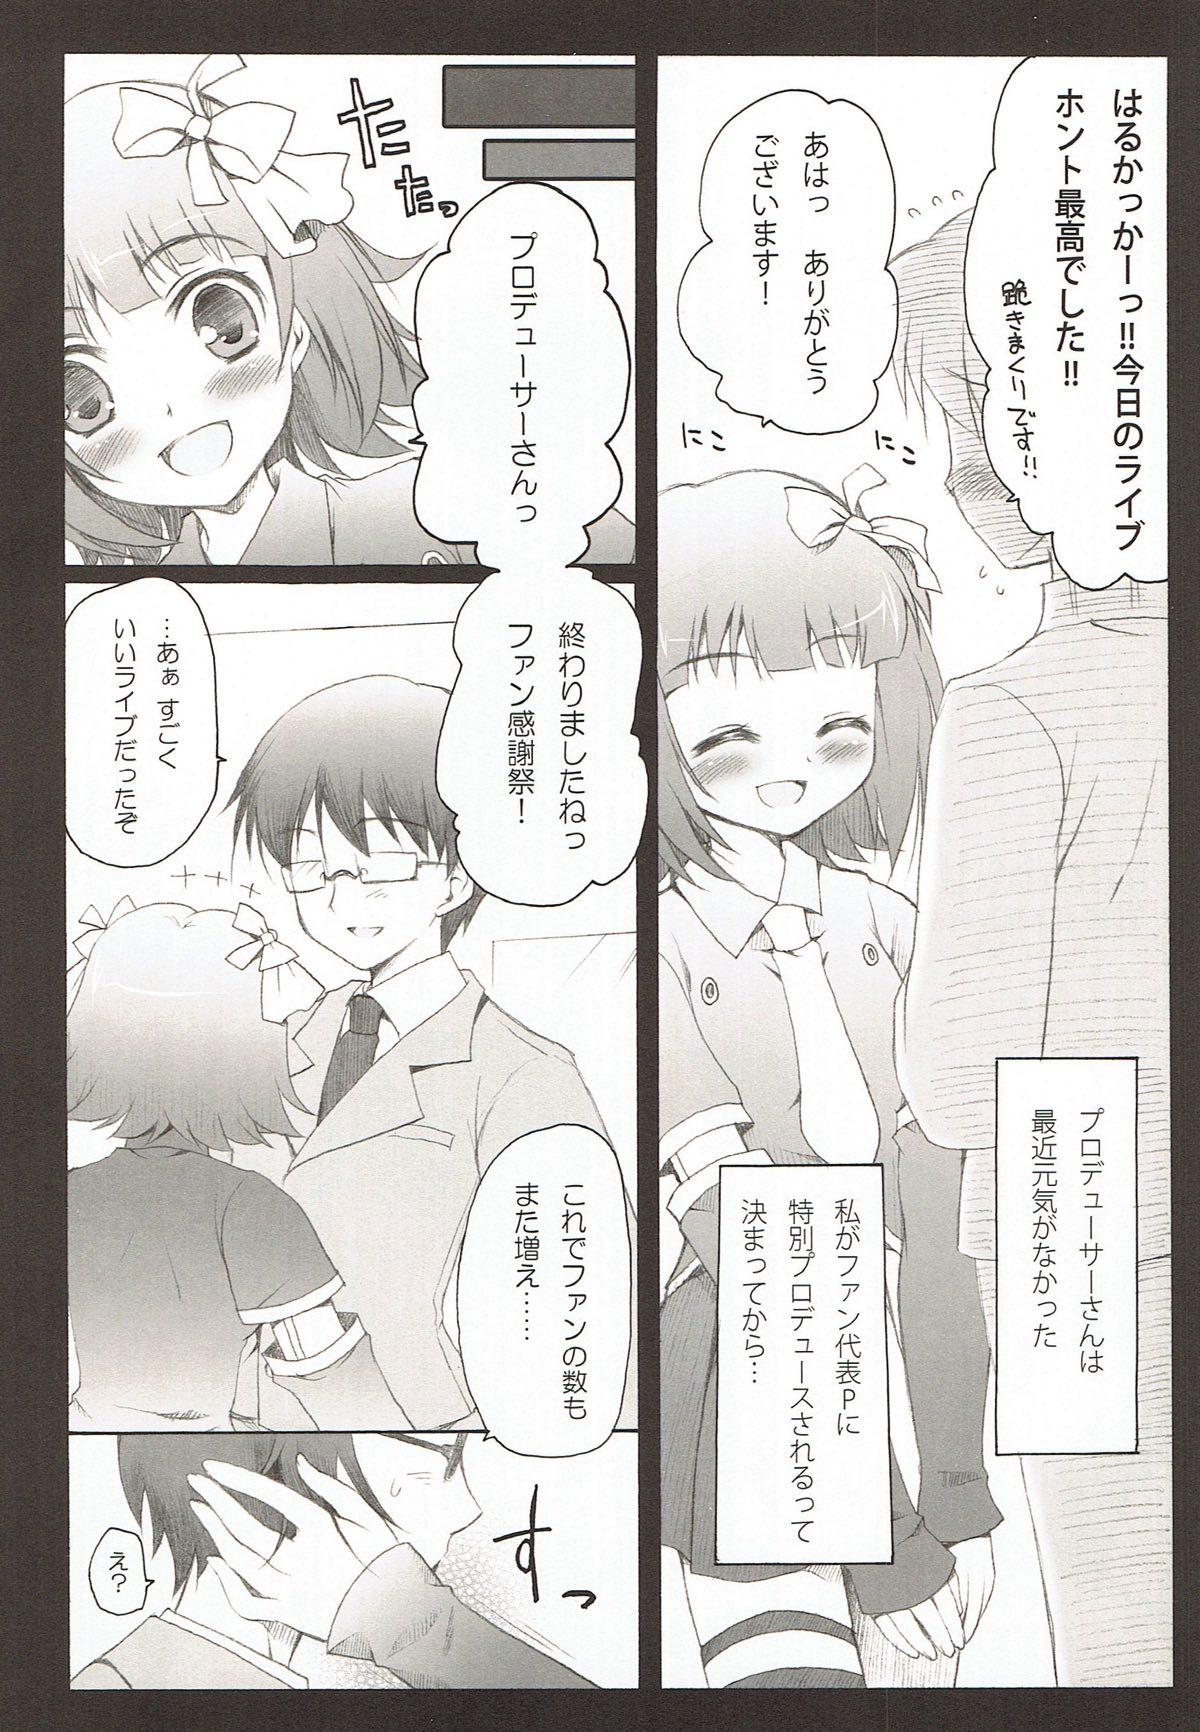 Old Young remindfull - The idolmaster Beard - Page 3